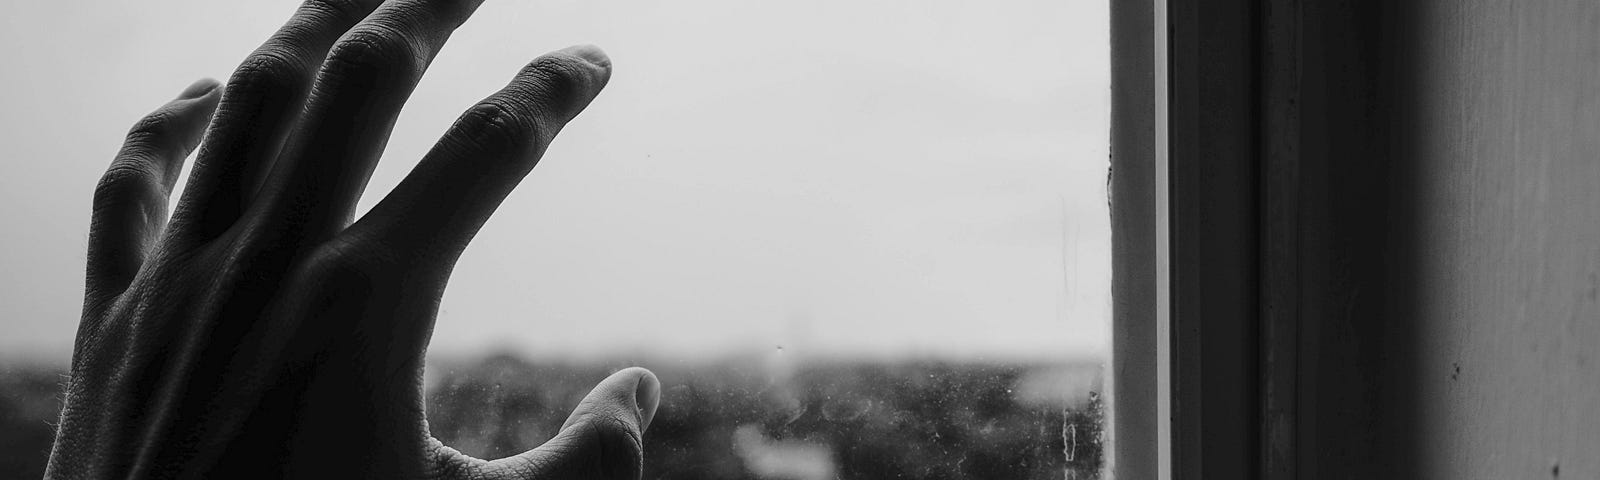 A stark and bleak black and white photograph of a hand touching a window pane.